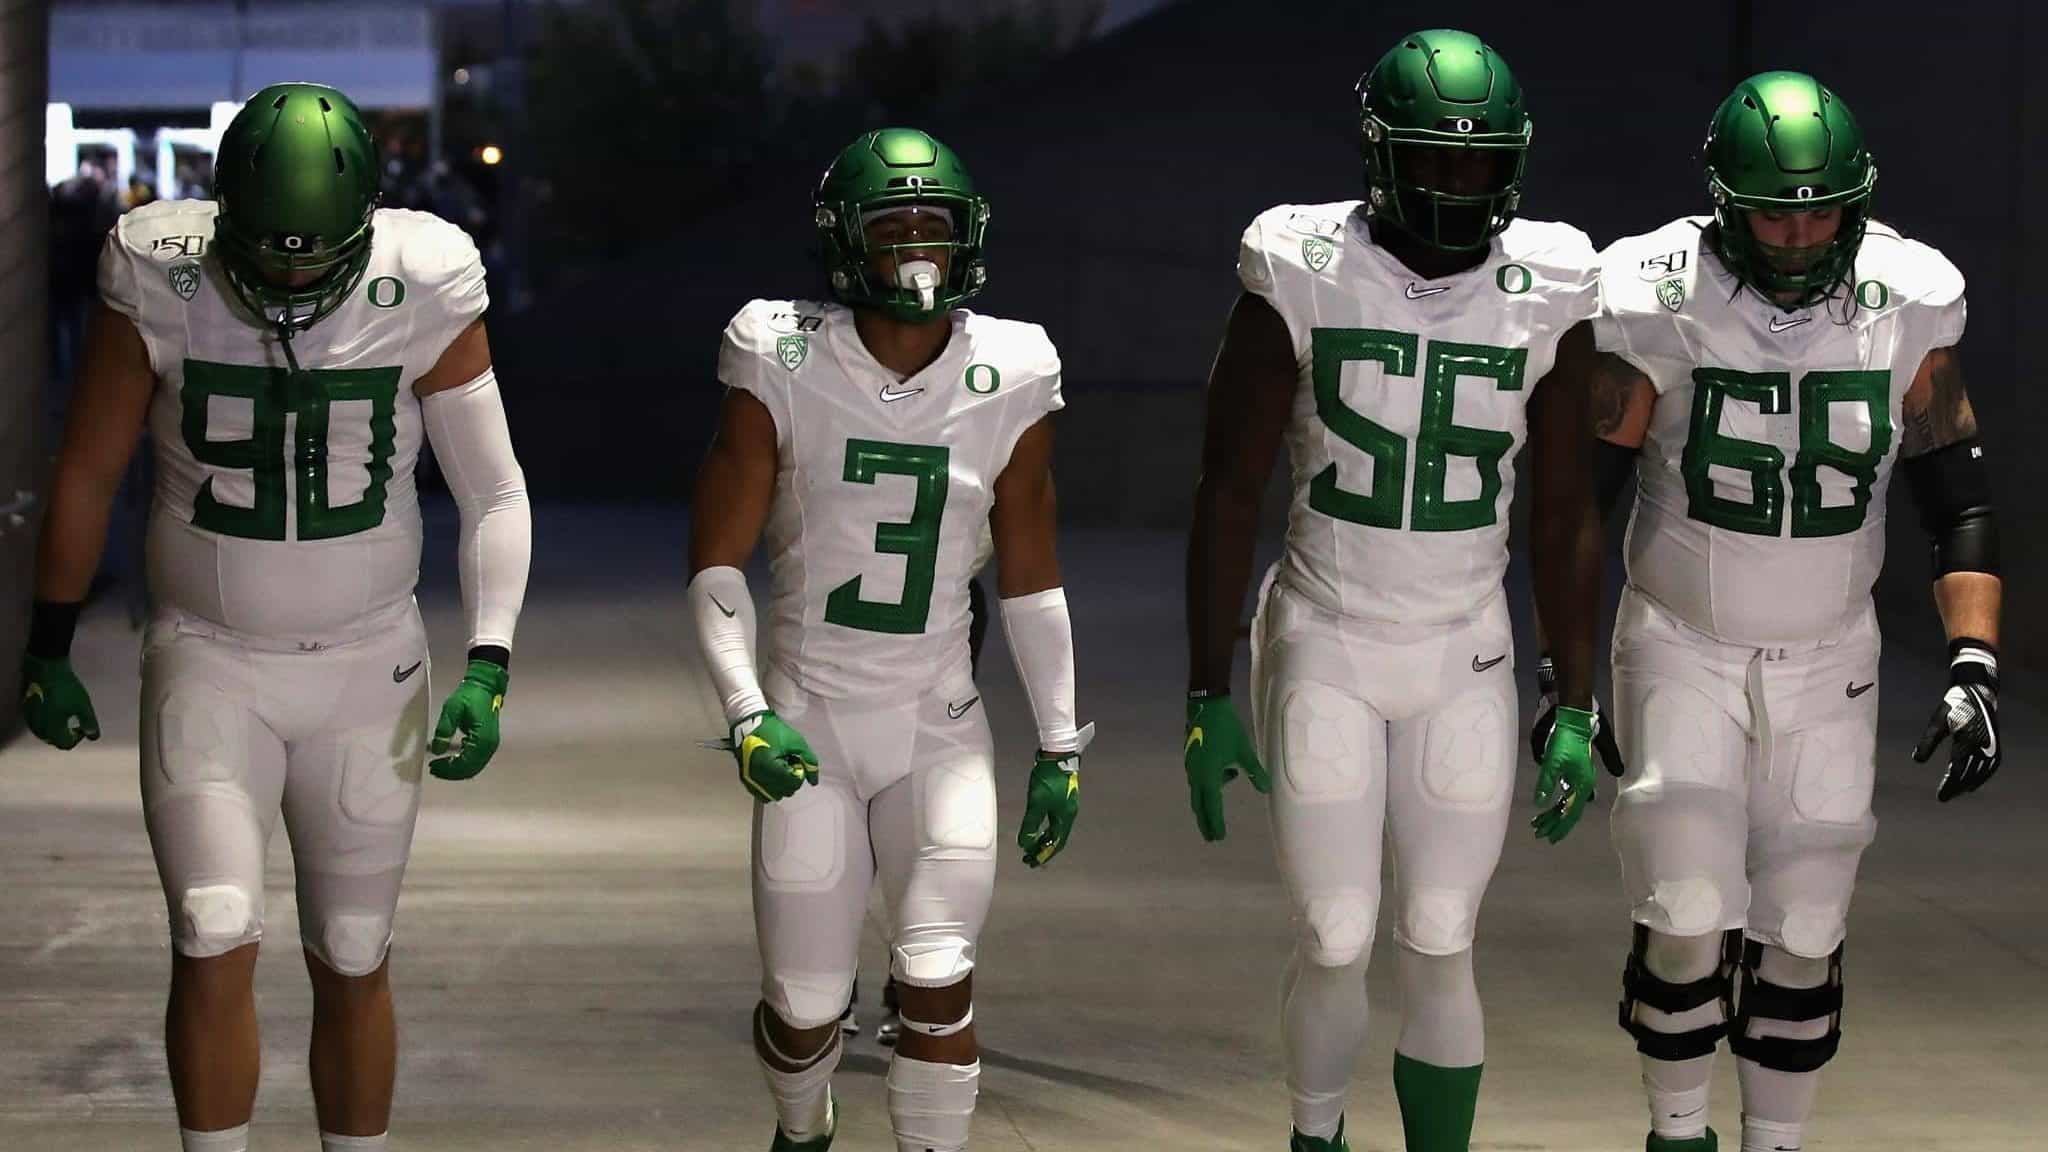 TEMPE, ARIZONA - NOVEMBER 23: (L-R) Defensive tackle Drayton Carlberg #90, wide receiver Johnny Johnson III #3, linebacker Bryson Young #56 and offensive lineman Shane Lemieux #68 of the Oregon Ducks walk to the field before the NCAAF game against the Arizona State Sun Devils at Sun Devil Stadium on November 23, 2019 in Tempe, Arizona.